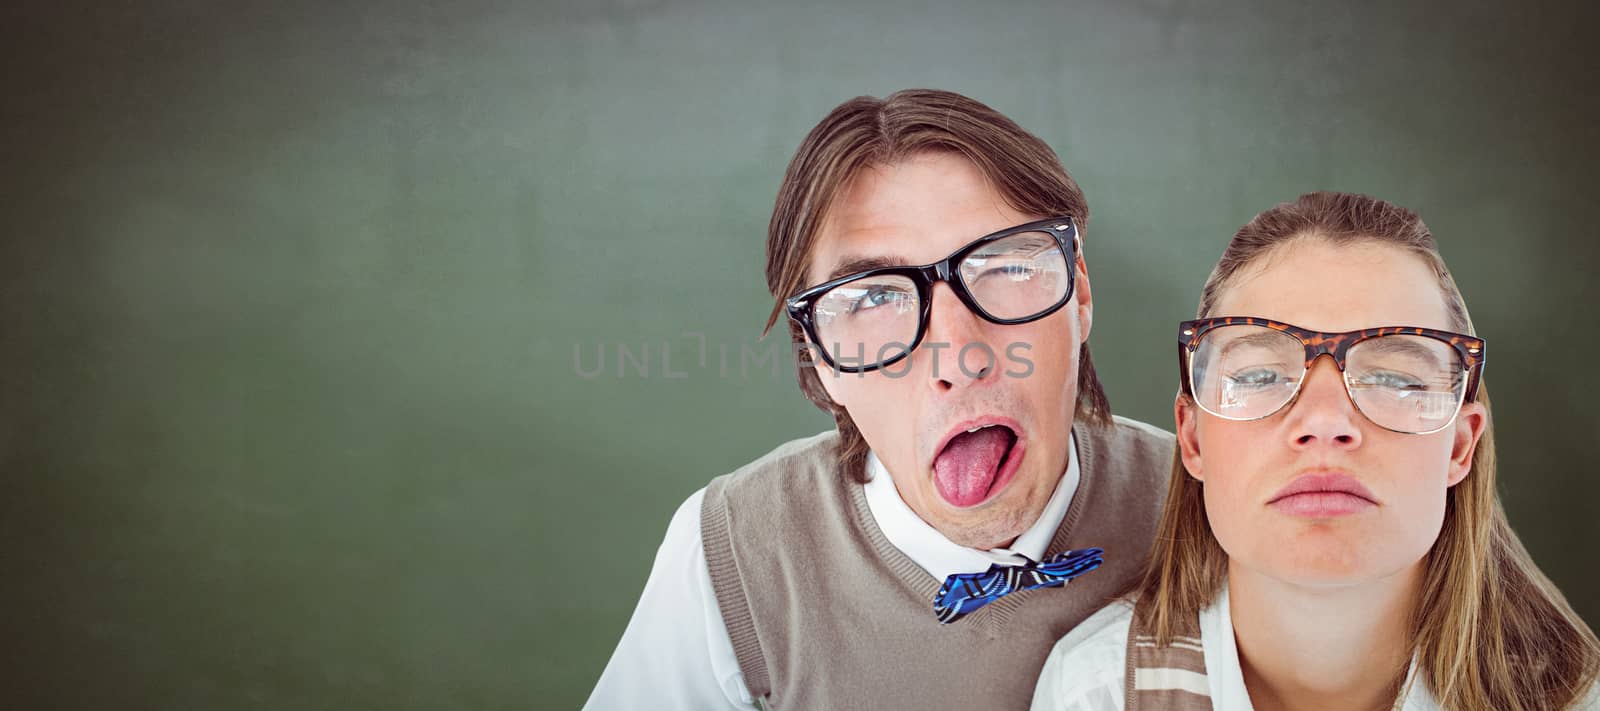 Funny geeky hipsters grimacing  against green chalkboard